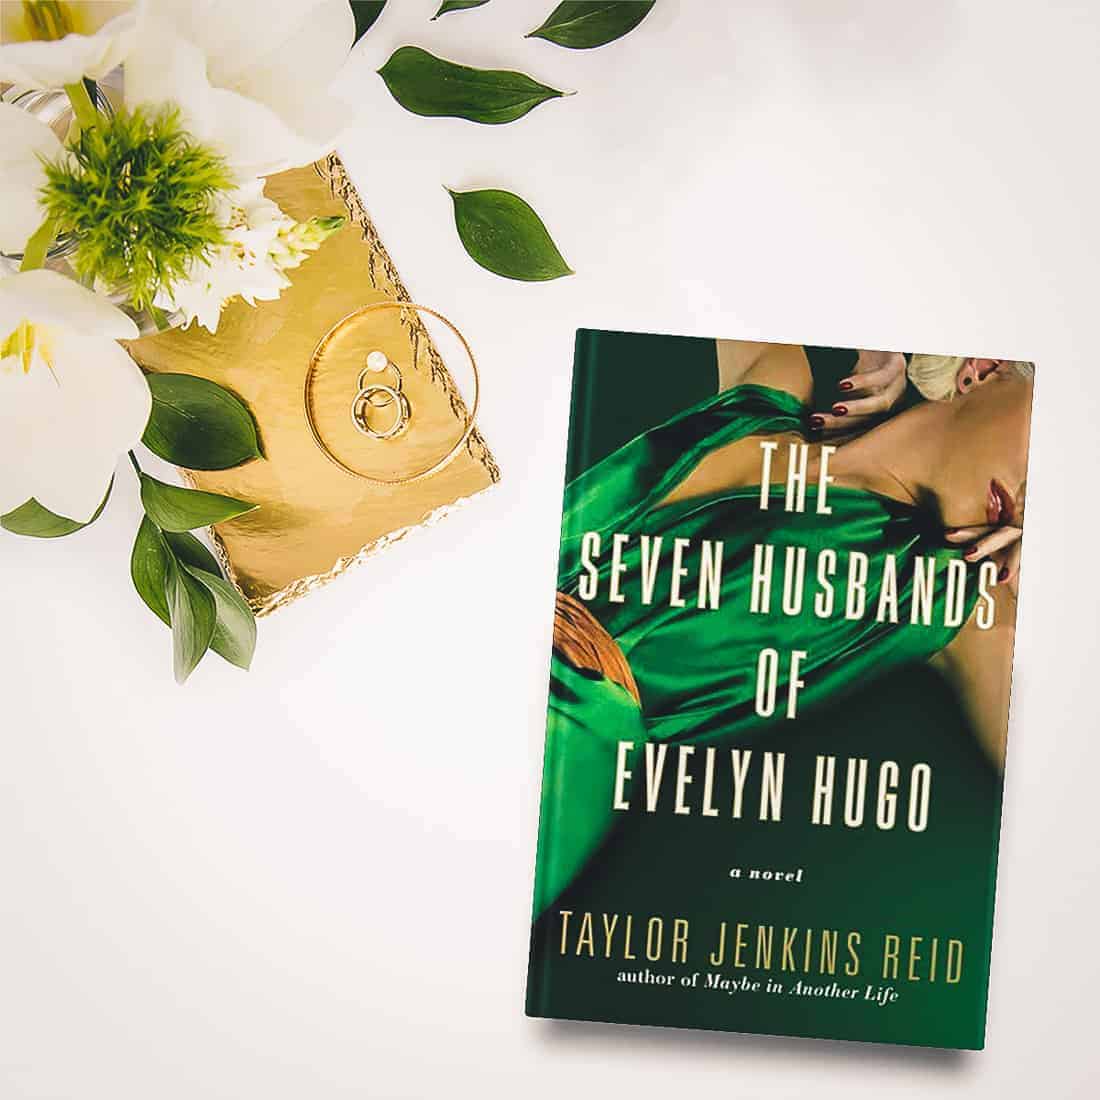 The Seven Husbands of Evelyn Hugo by Taylor Jenkins Reid – Simply Stunning!